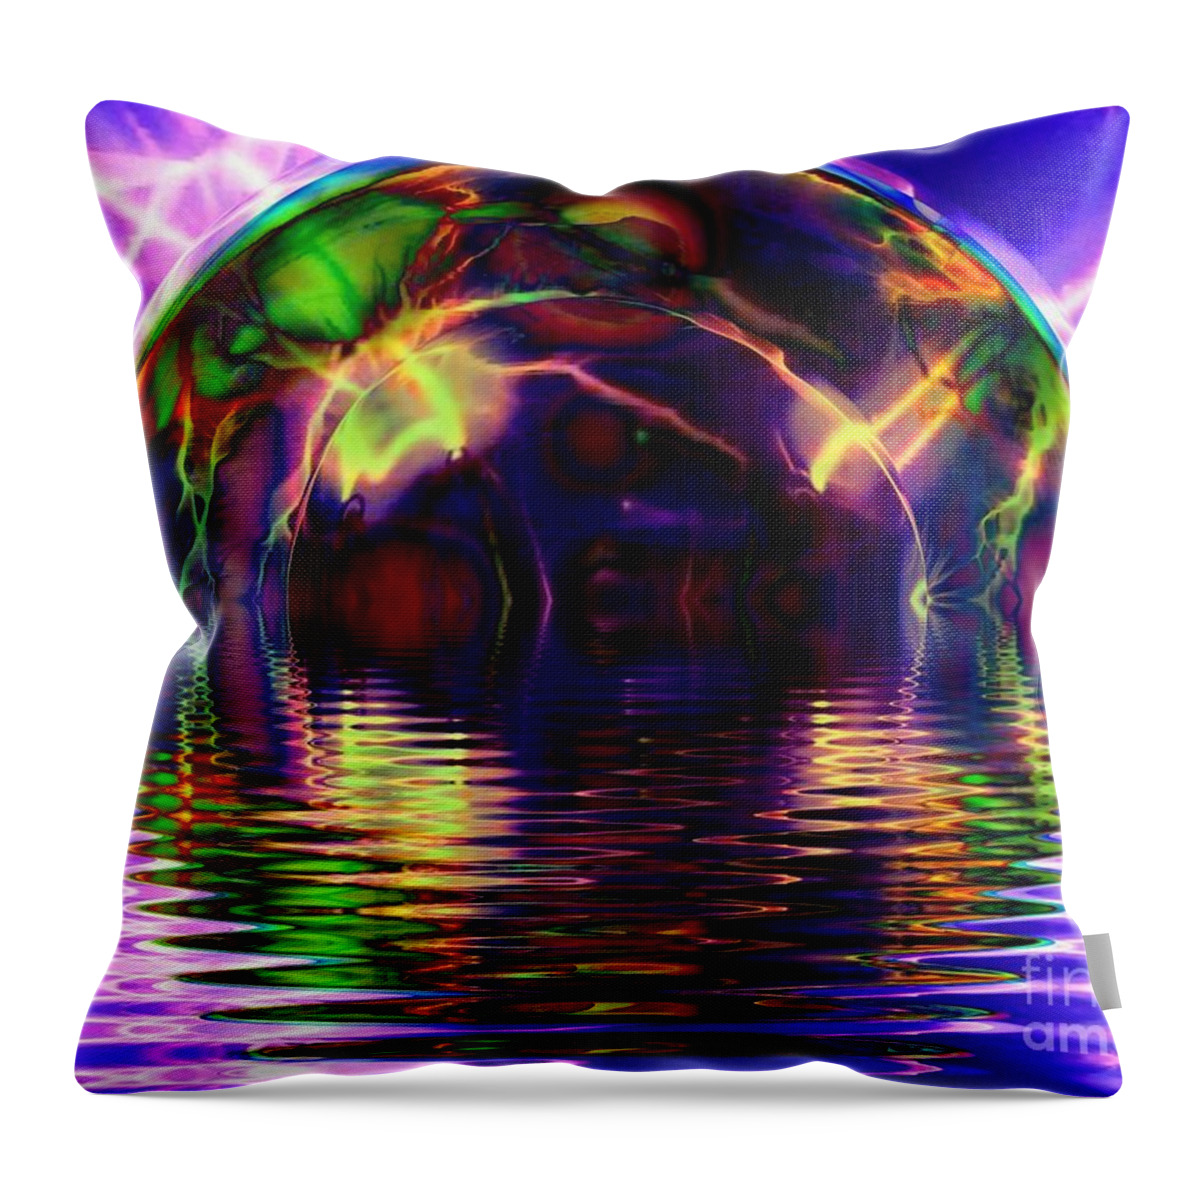 Fractal Art Throw Pillow featuring the digital art I Sing the Bubble Electric by Elizabeth McTaggart